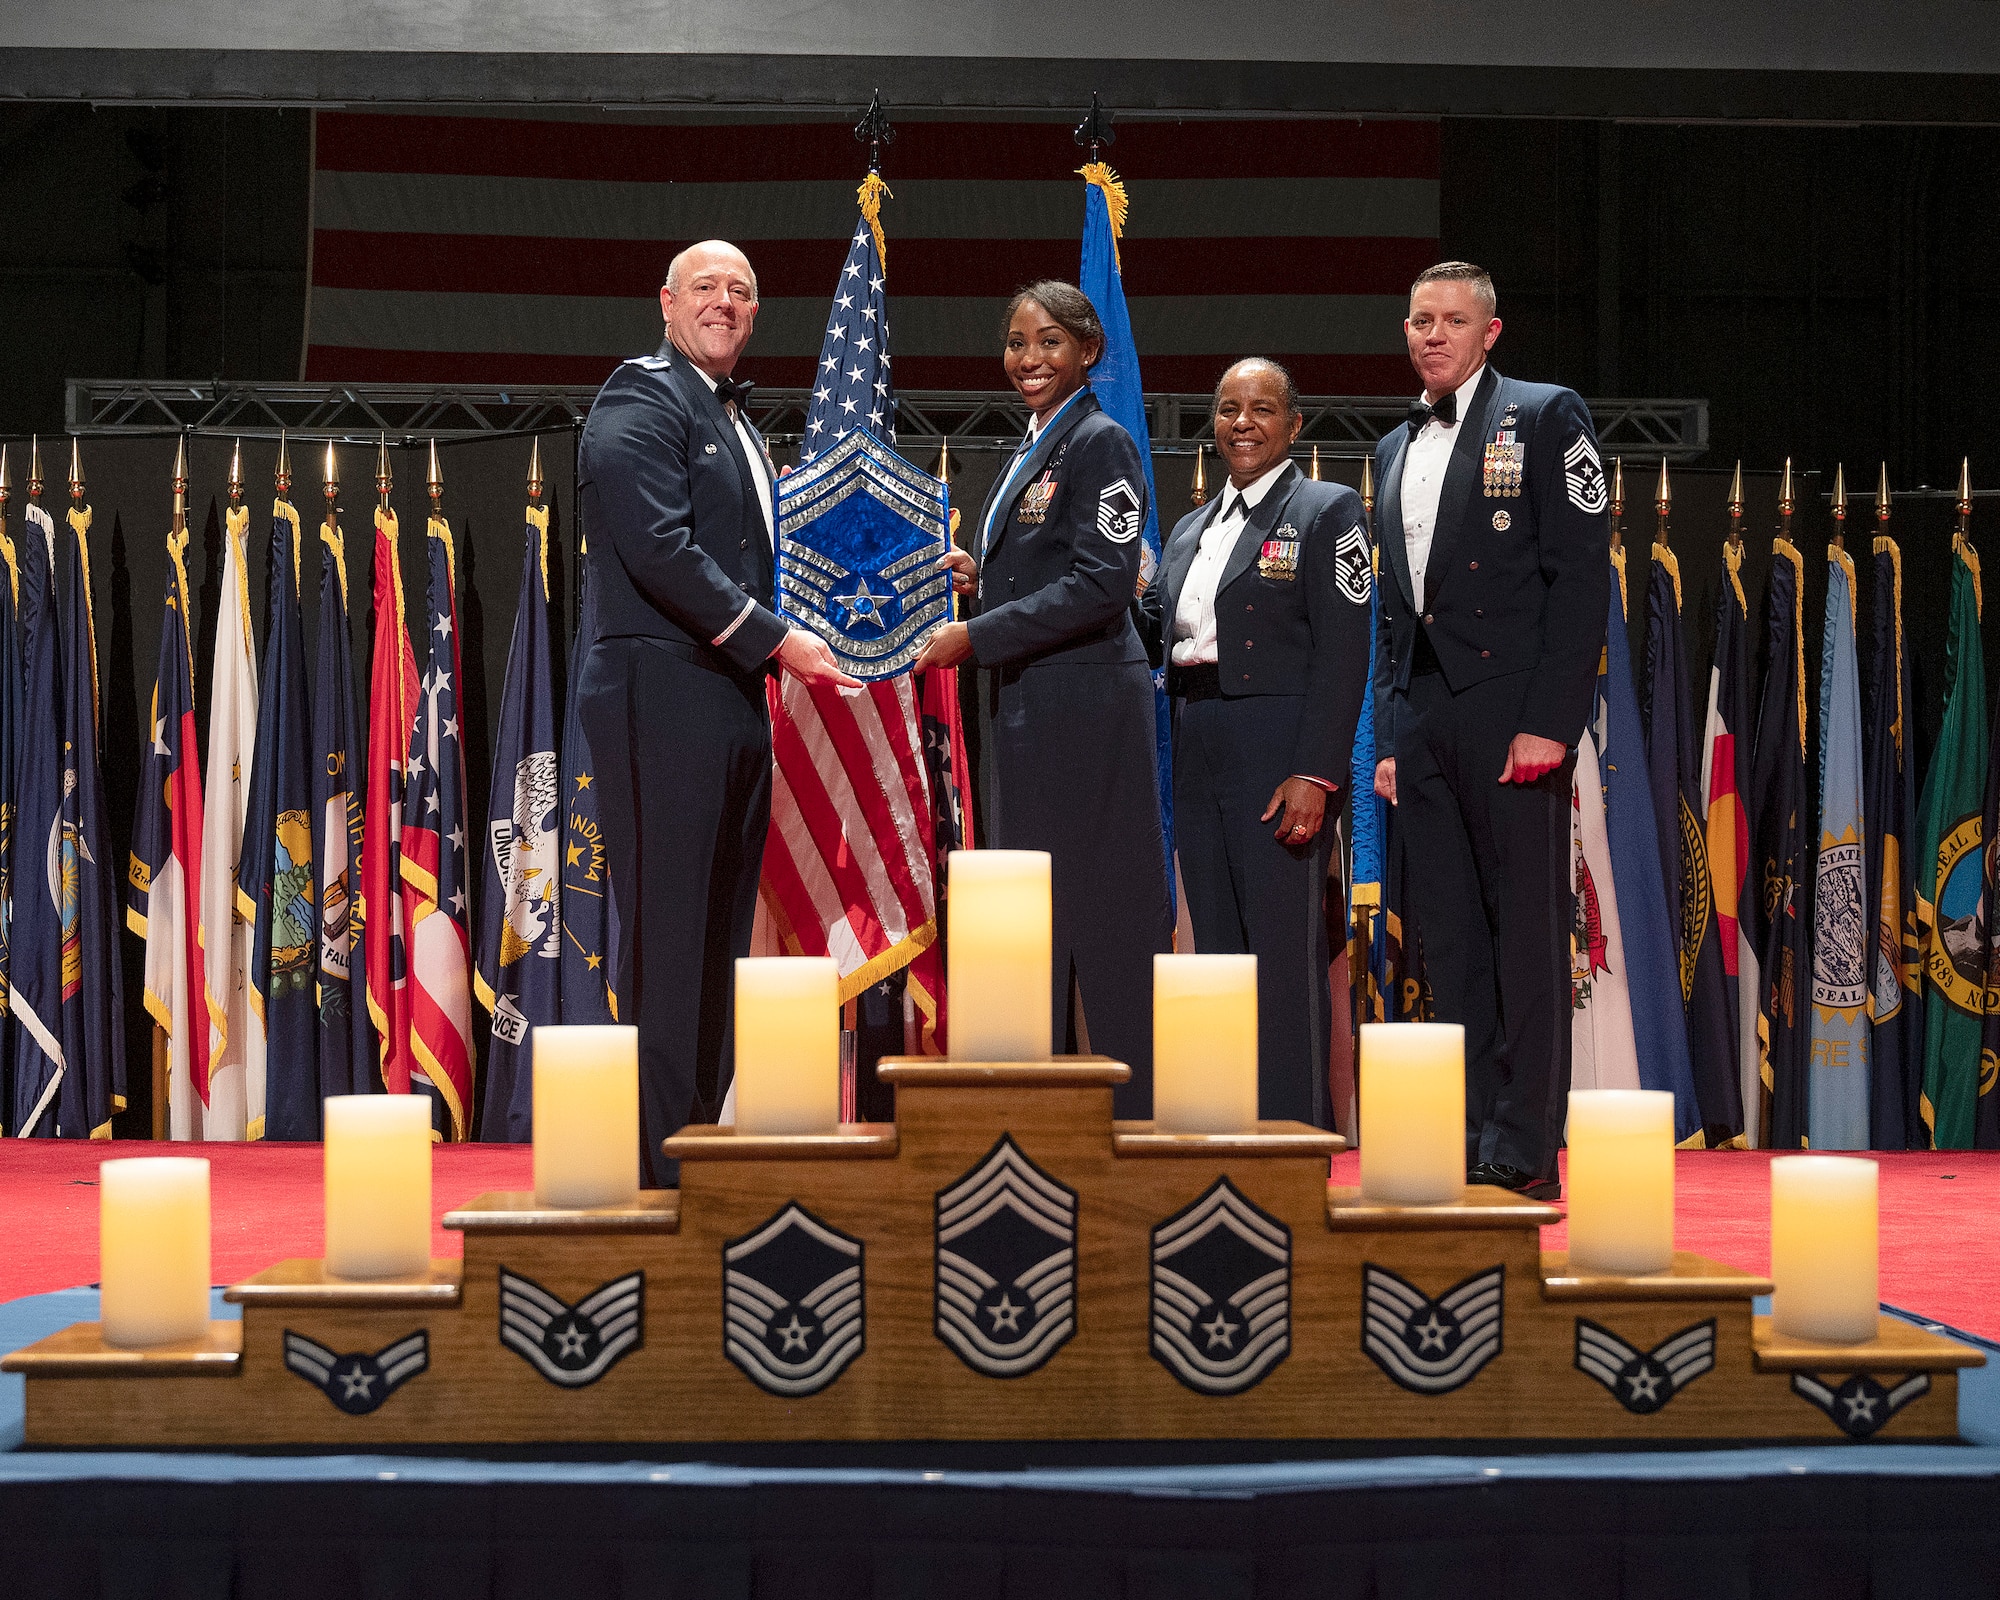 Col. Patrick Miller, 88th Air Base Wing and installation commander, presents a plaque to Chief Master Sgt. Starr Williams, U.S. Air Force School of Aerospace Medicine, during the Wright-Patterson Chief Master Sergeant Recognition Ceremony on May 14, 2022, at the National Museum of the U.S. Air Force. The event honored the Wright-Patt Airmen recently selected for promotion to the Air Force’s highest enlisted rank. (U.S. Air Force photo by R.J. Oriez)